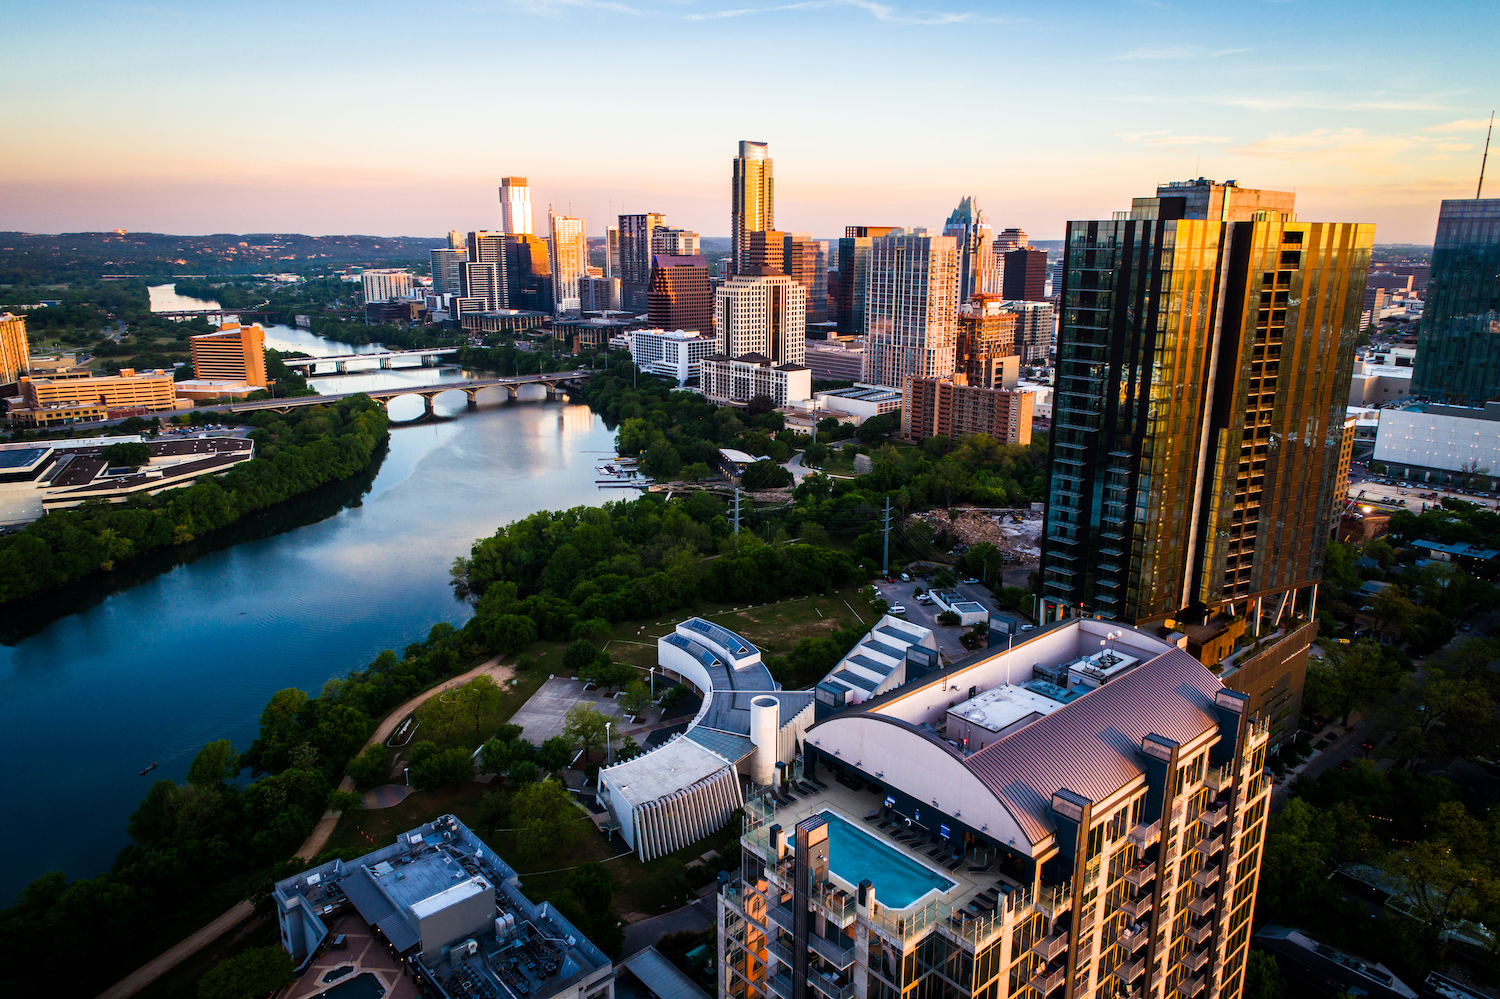 A view of downtown Austin from the river during sunrise.